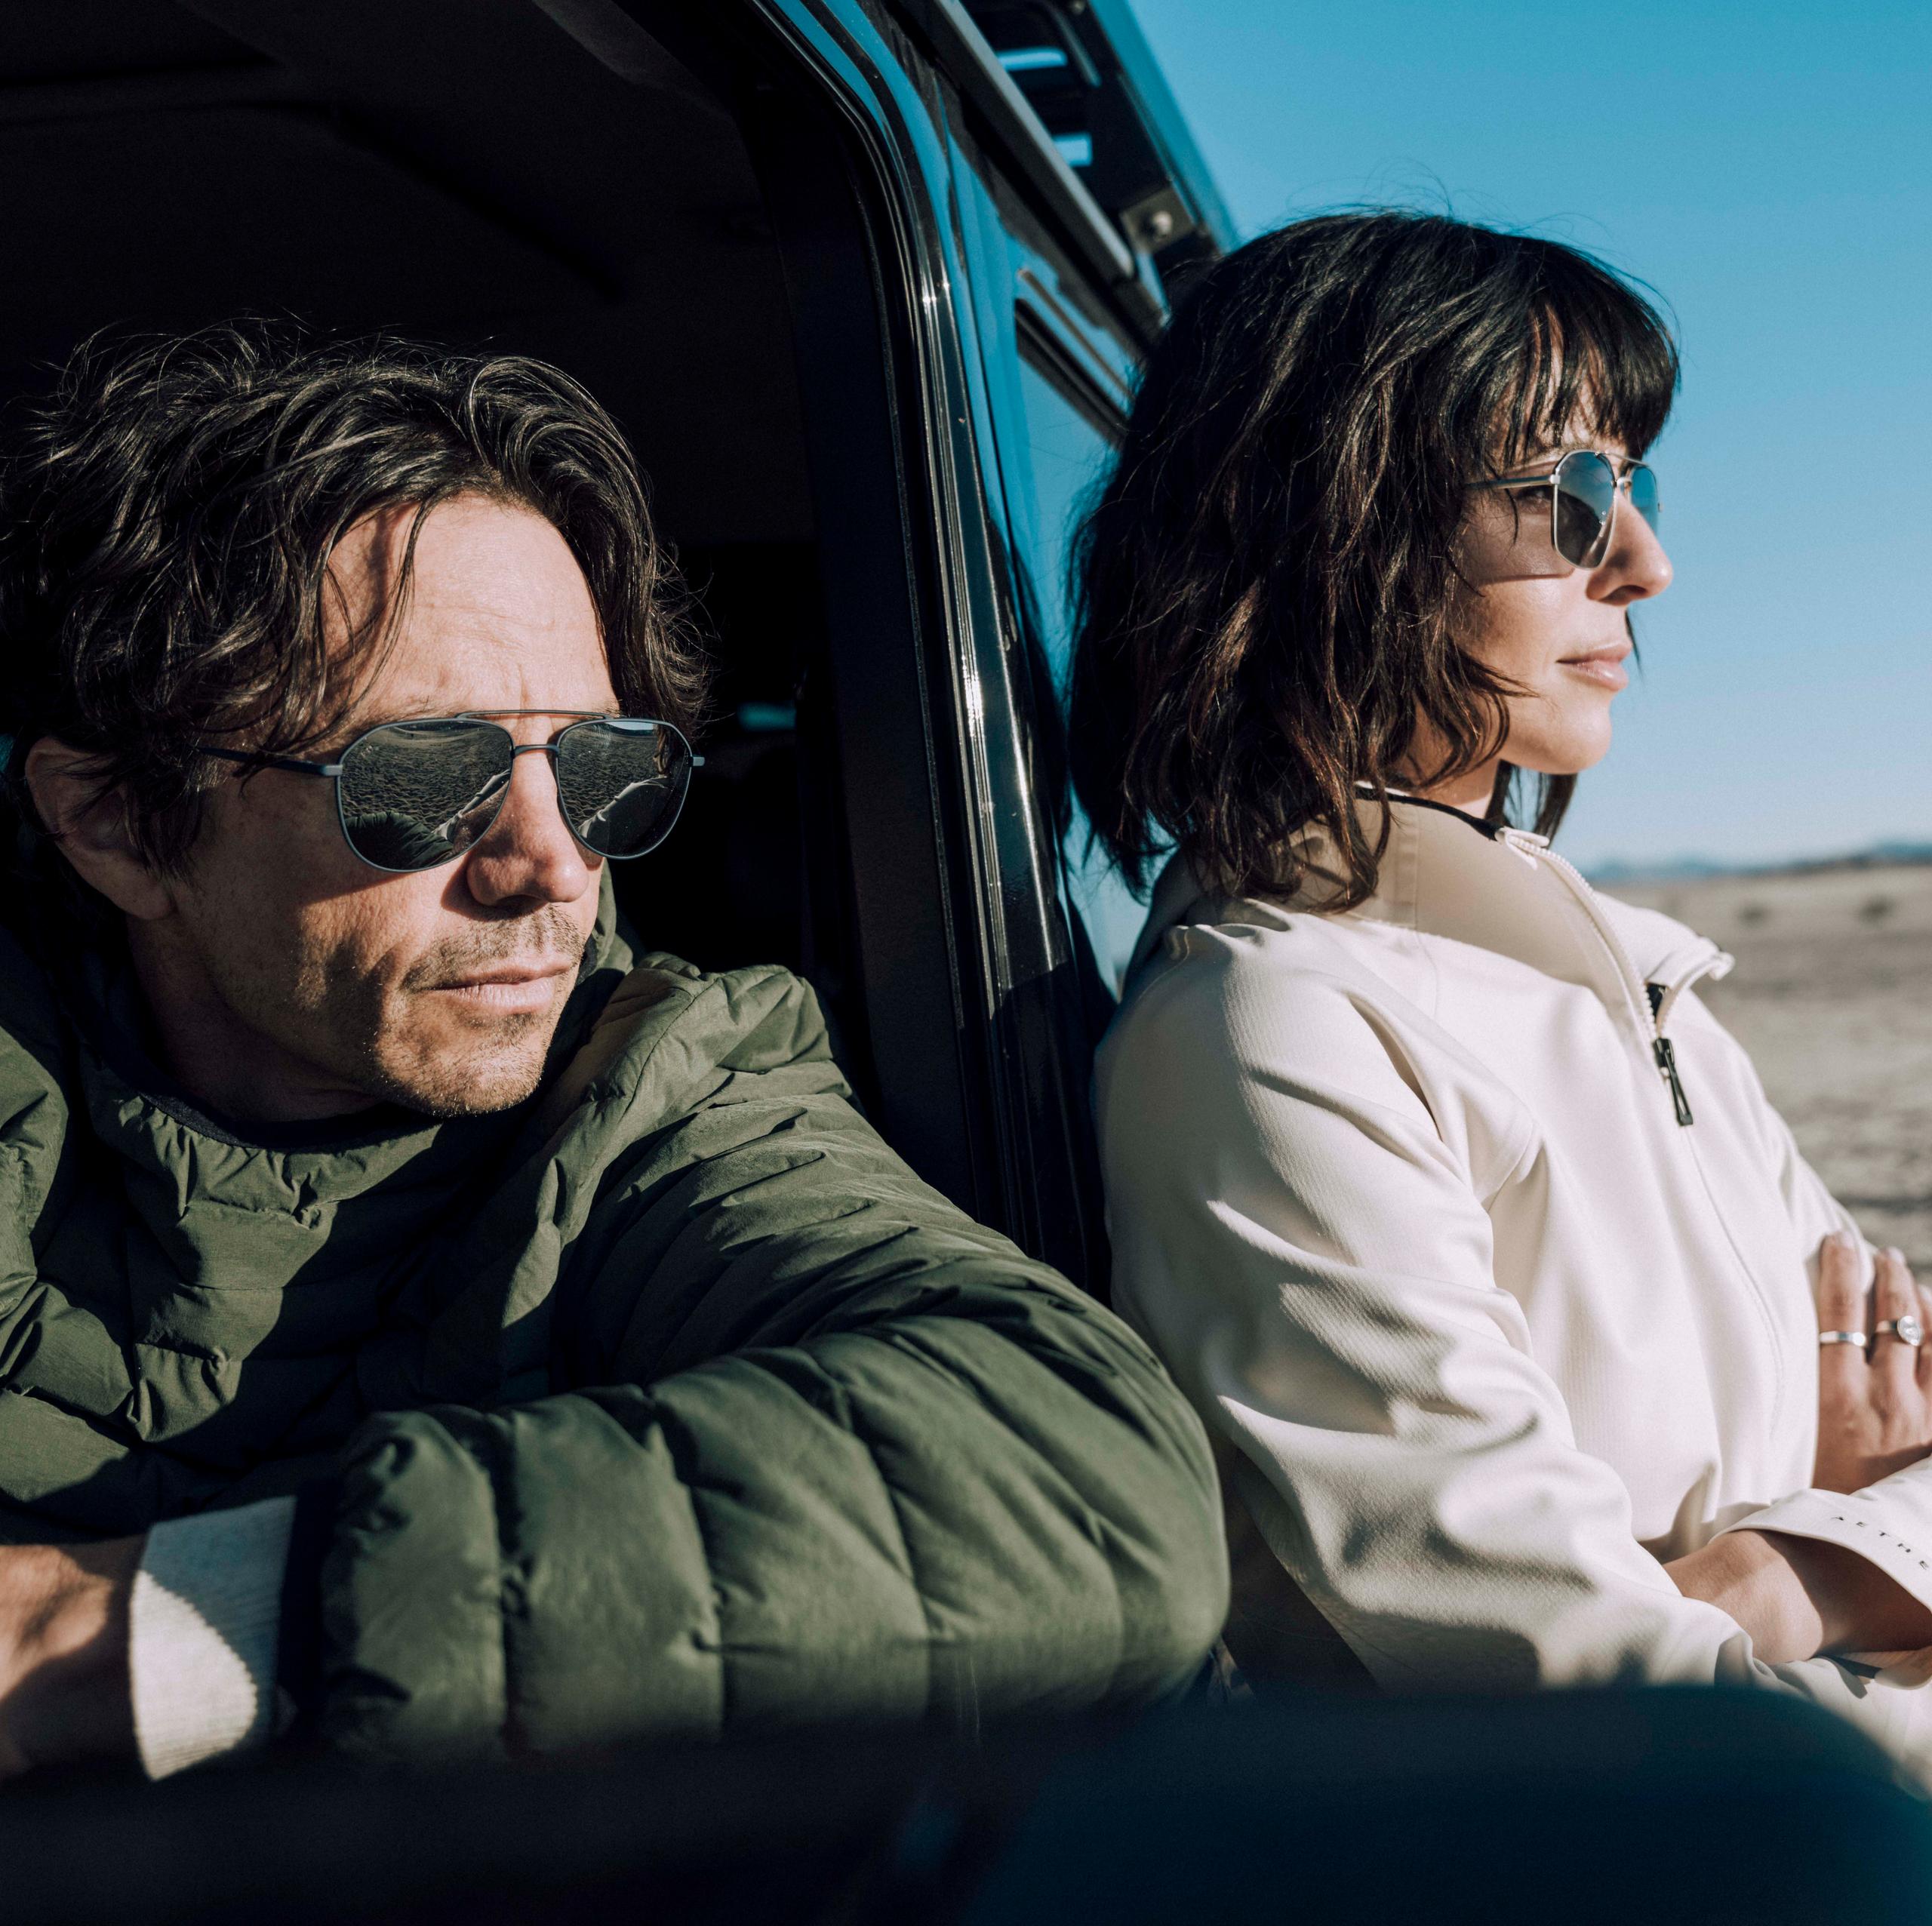 Man in driver seat and woman leaning against car looking out to vast sand dunes